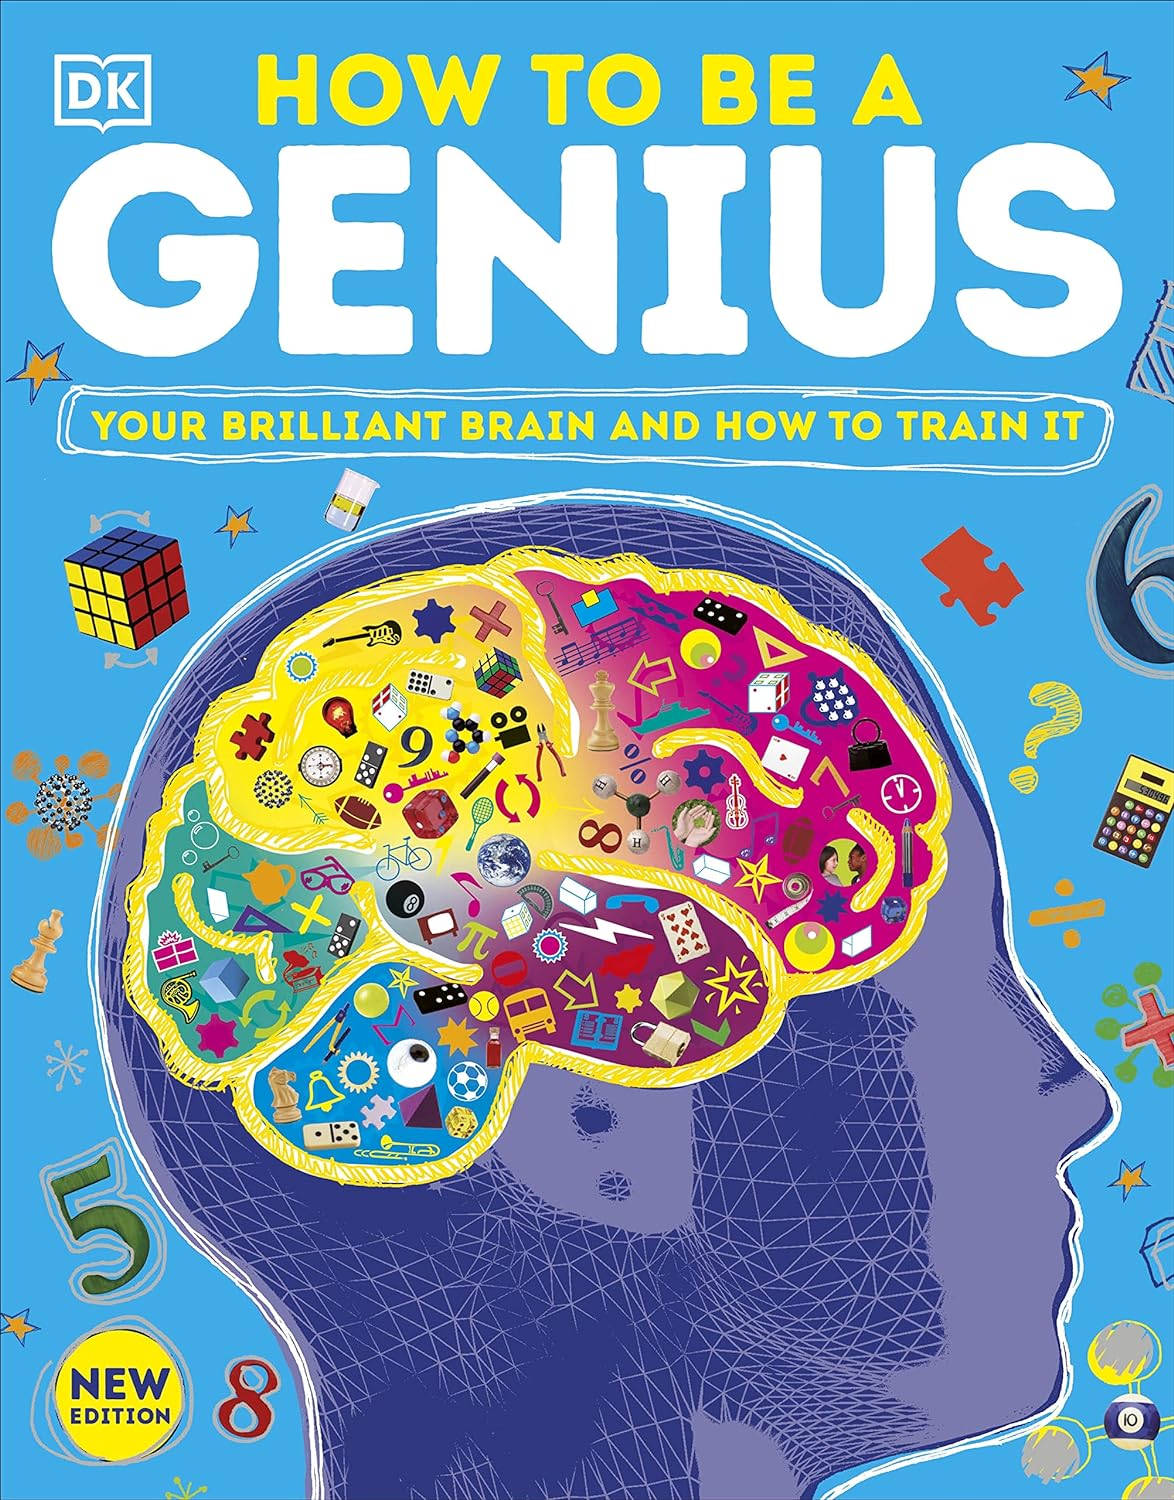 Book- JOHN WOODWARD DK How to be a Genius Your Brilliant Brain And How To Train It Paperback